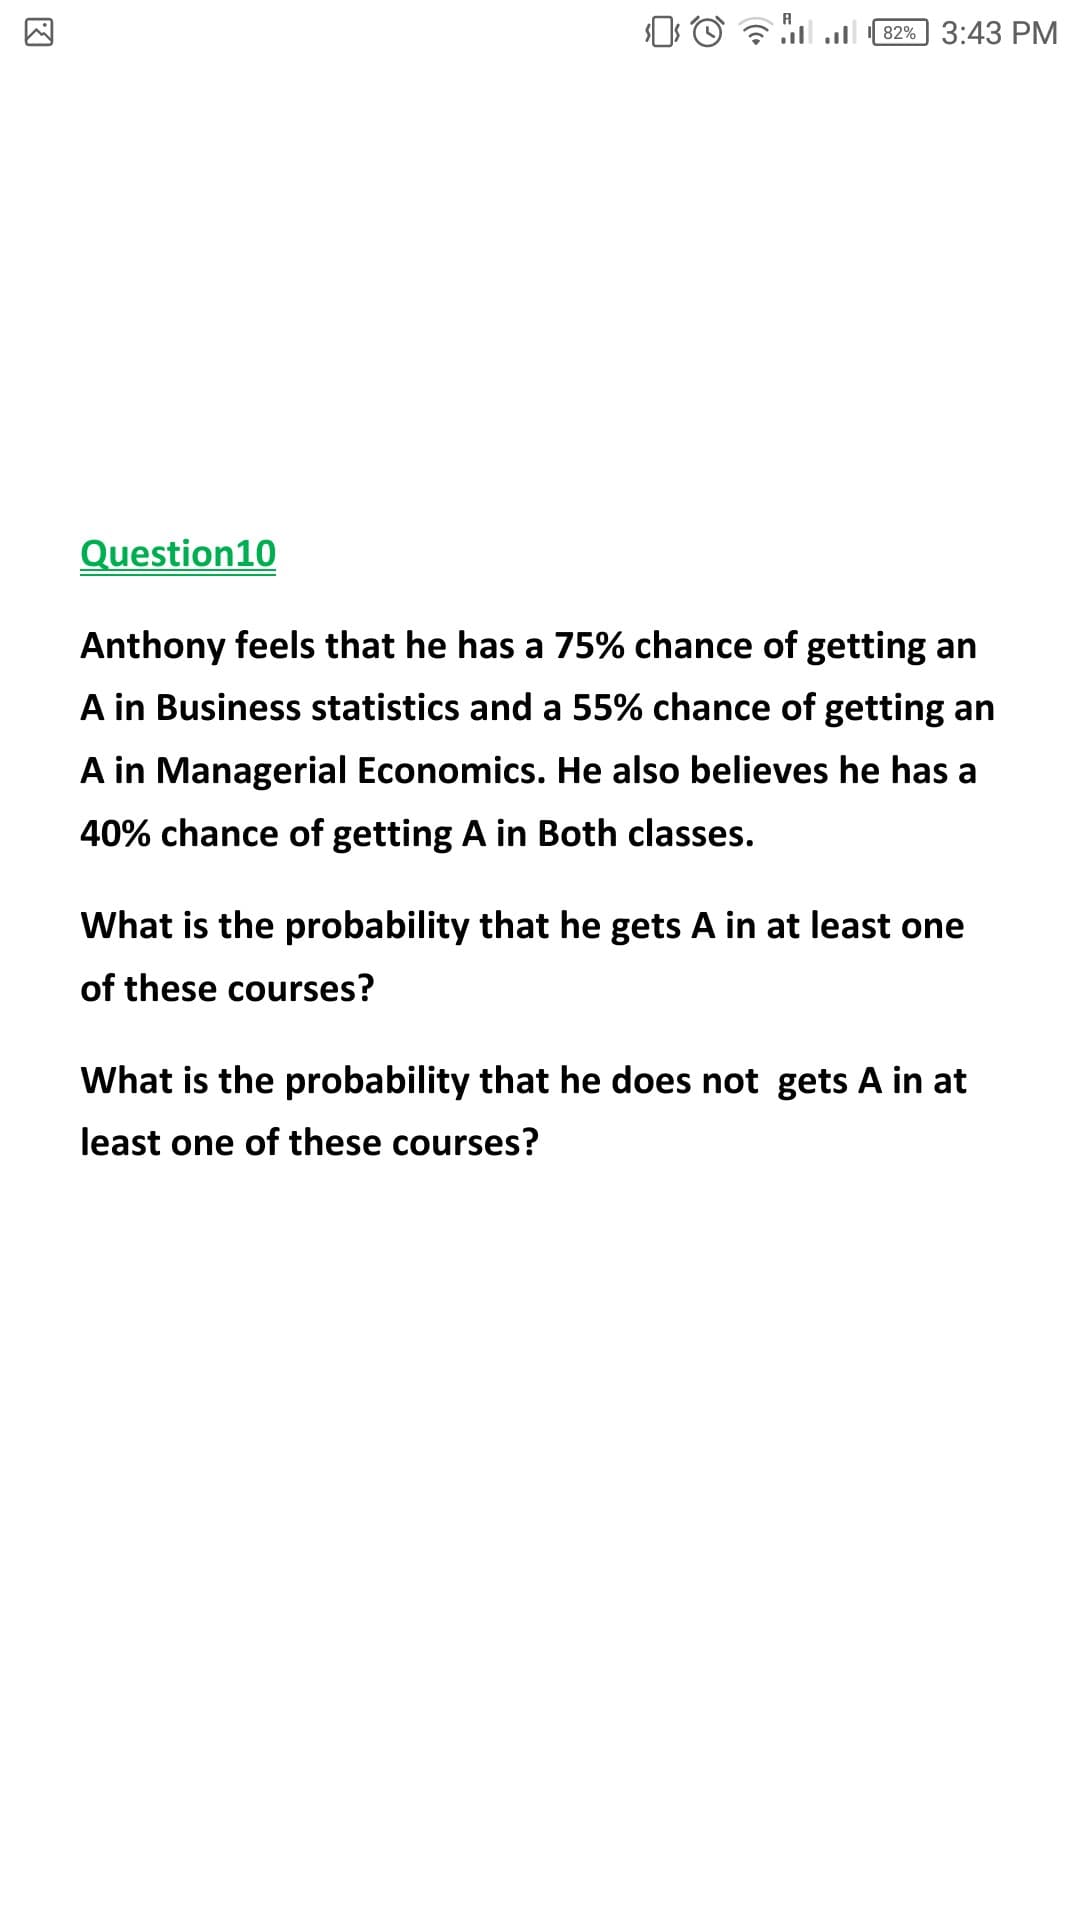 82% 3:43 PM
Question10
Anthony feels that he has a 75% chance of getting an
A in Business statistics and a 55% chance of getting an
A in Managerial Economics. He also believes he has a
40% chance of getting A in Both classes.
What is the probability that he gets A in at least one
of these courses?
What is the probability that he does not gets A in at
least one of these courses?
